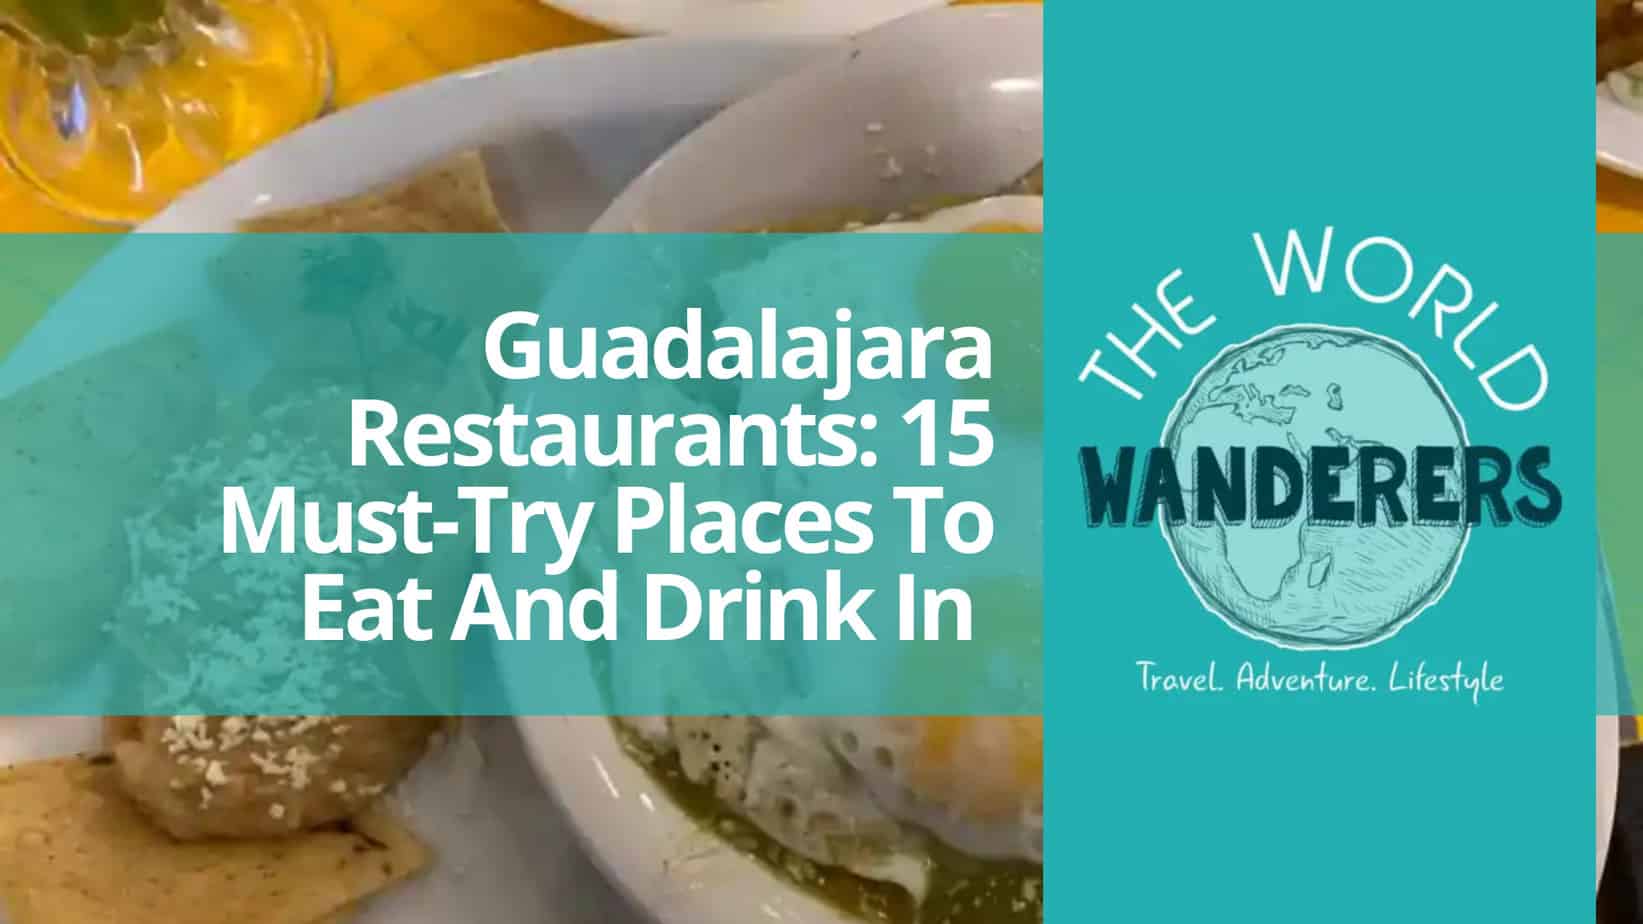 Guadalajara Restaurants 15 Must-Try Places To Eat And Drink In